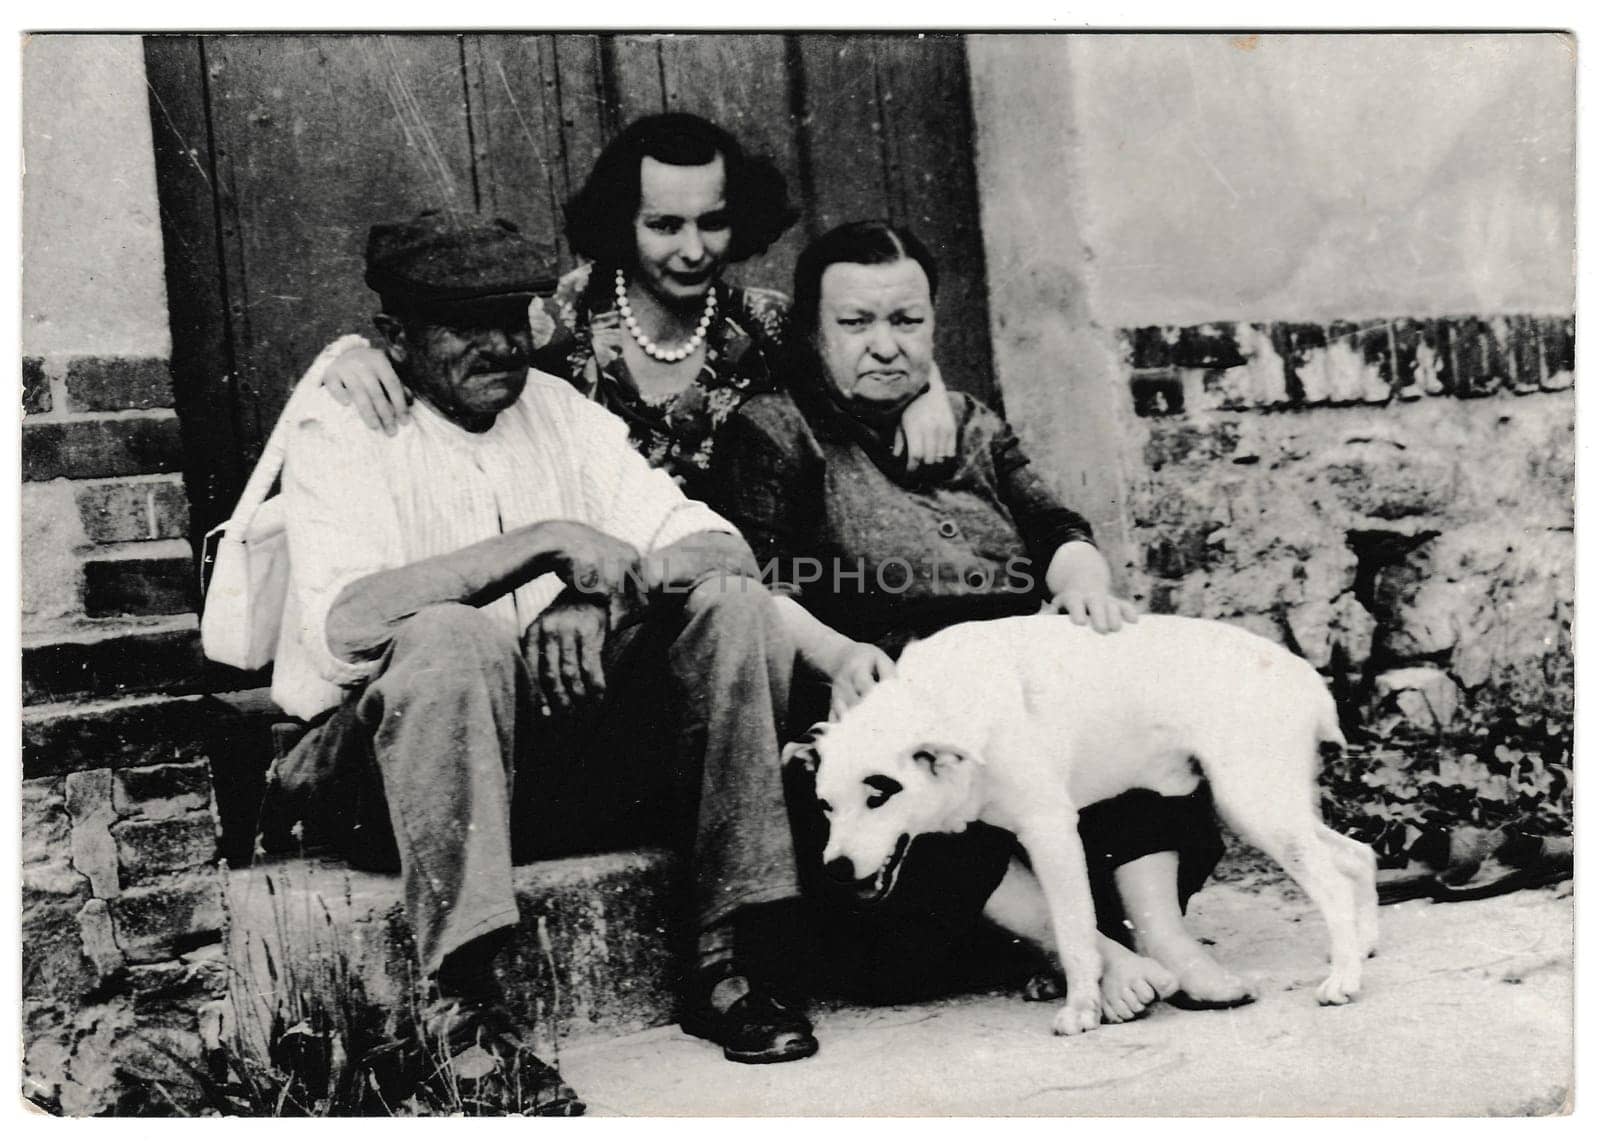 Retro photo shows rural people sit on a doorstep with dog. Black and white vintage photography by roman_nerud